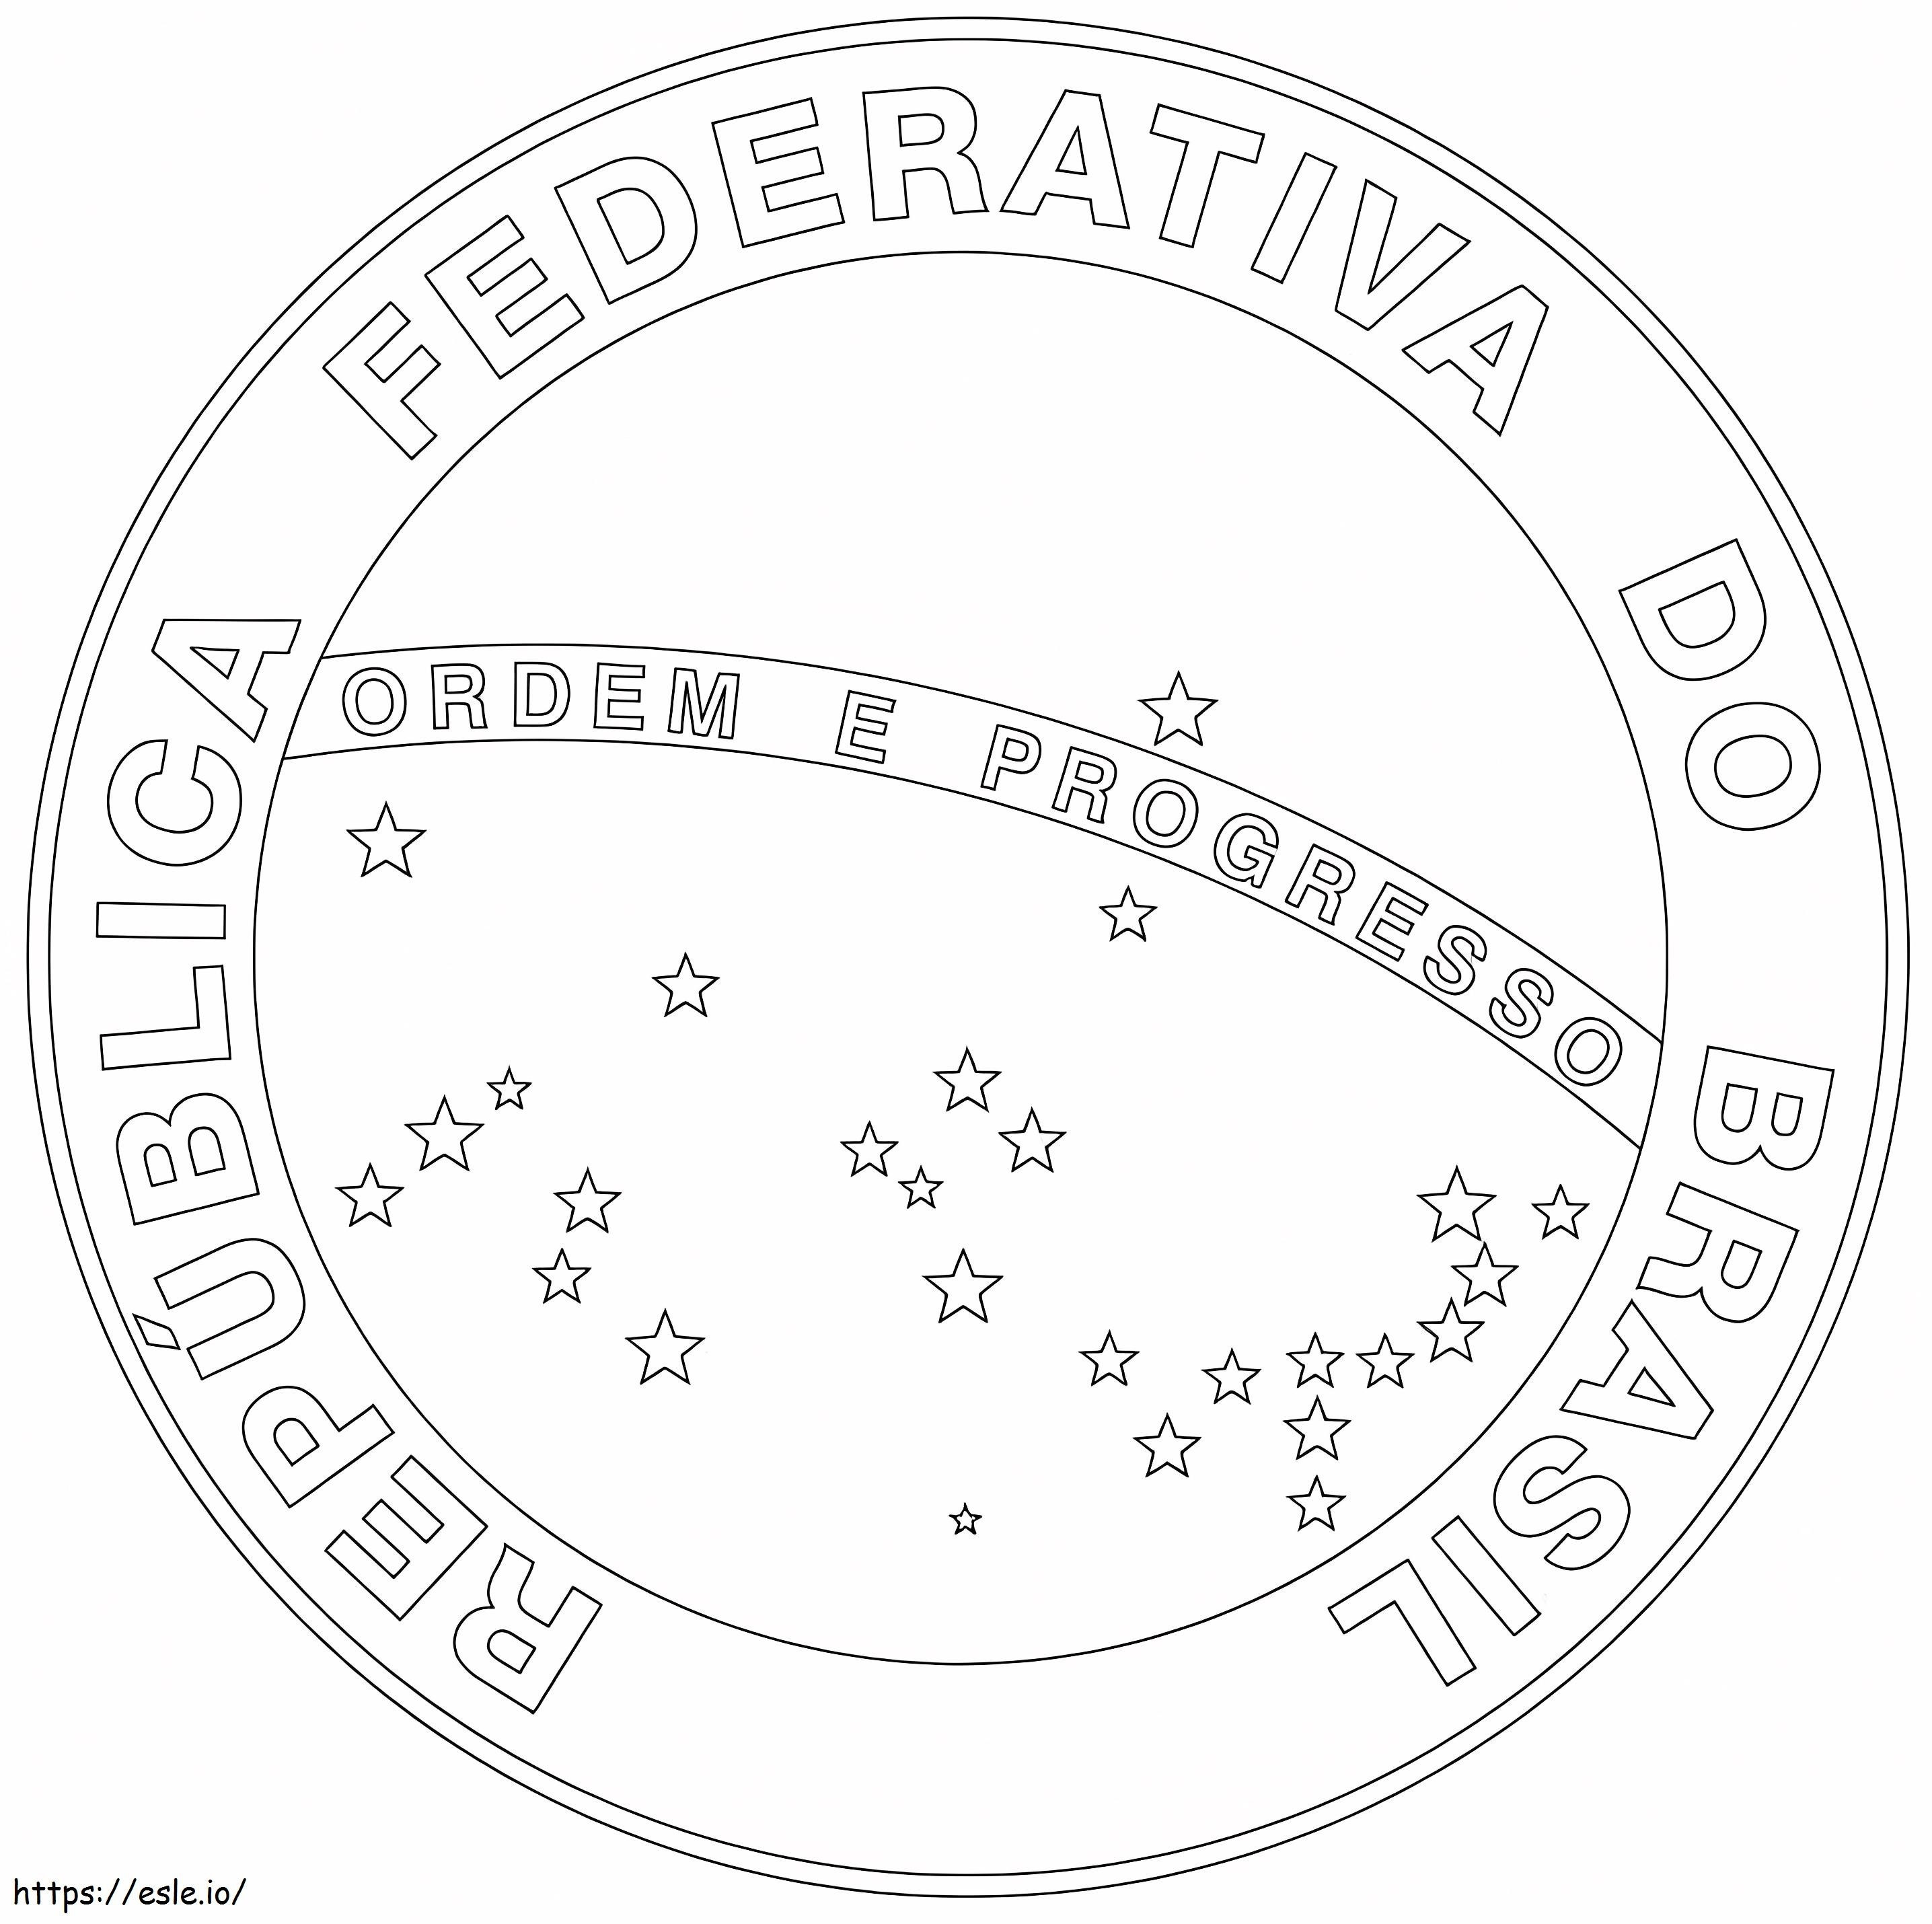 National Seal Of Brazil coloring page